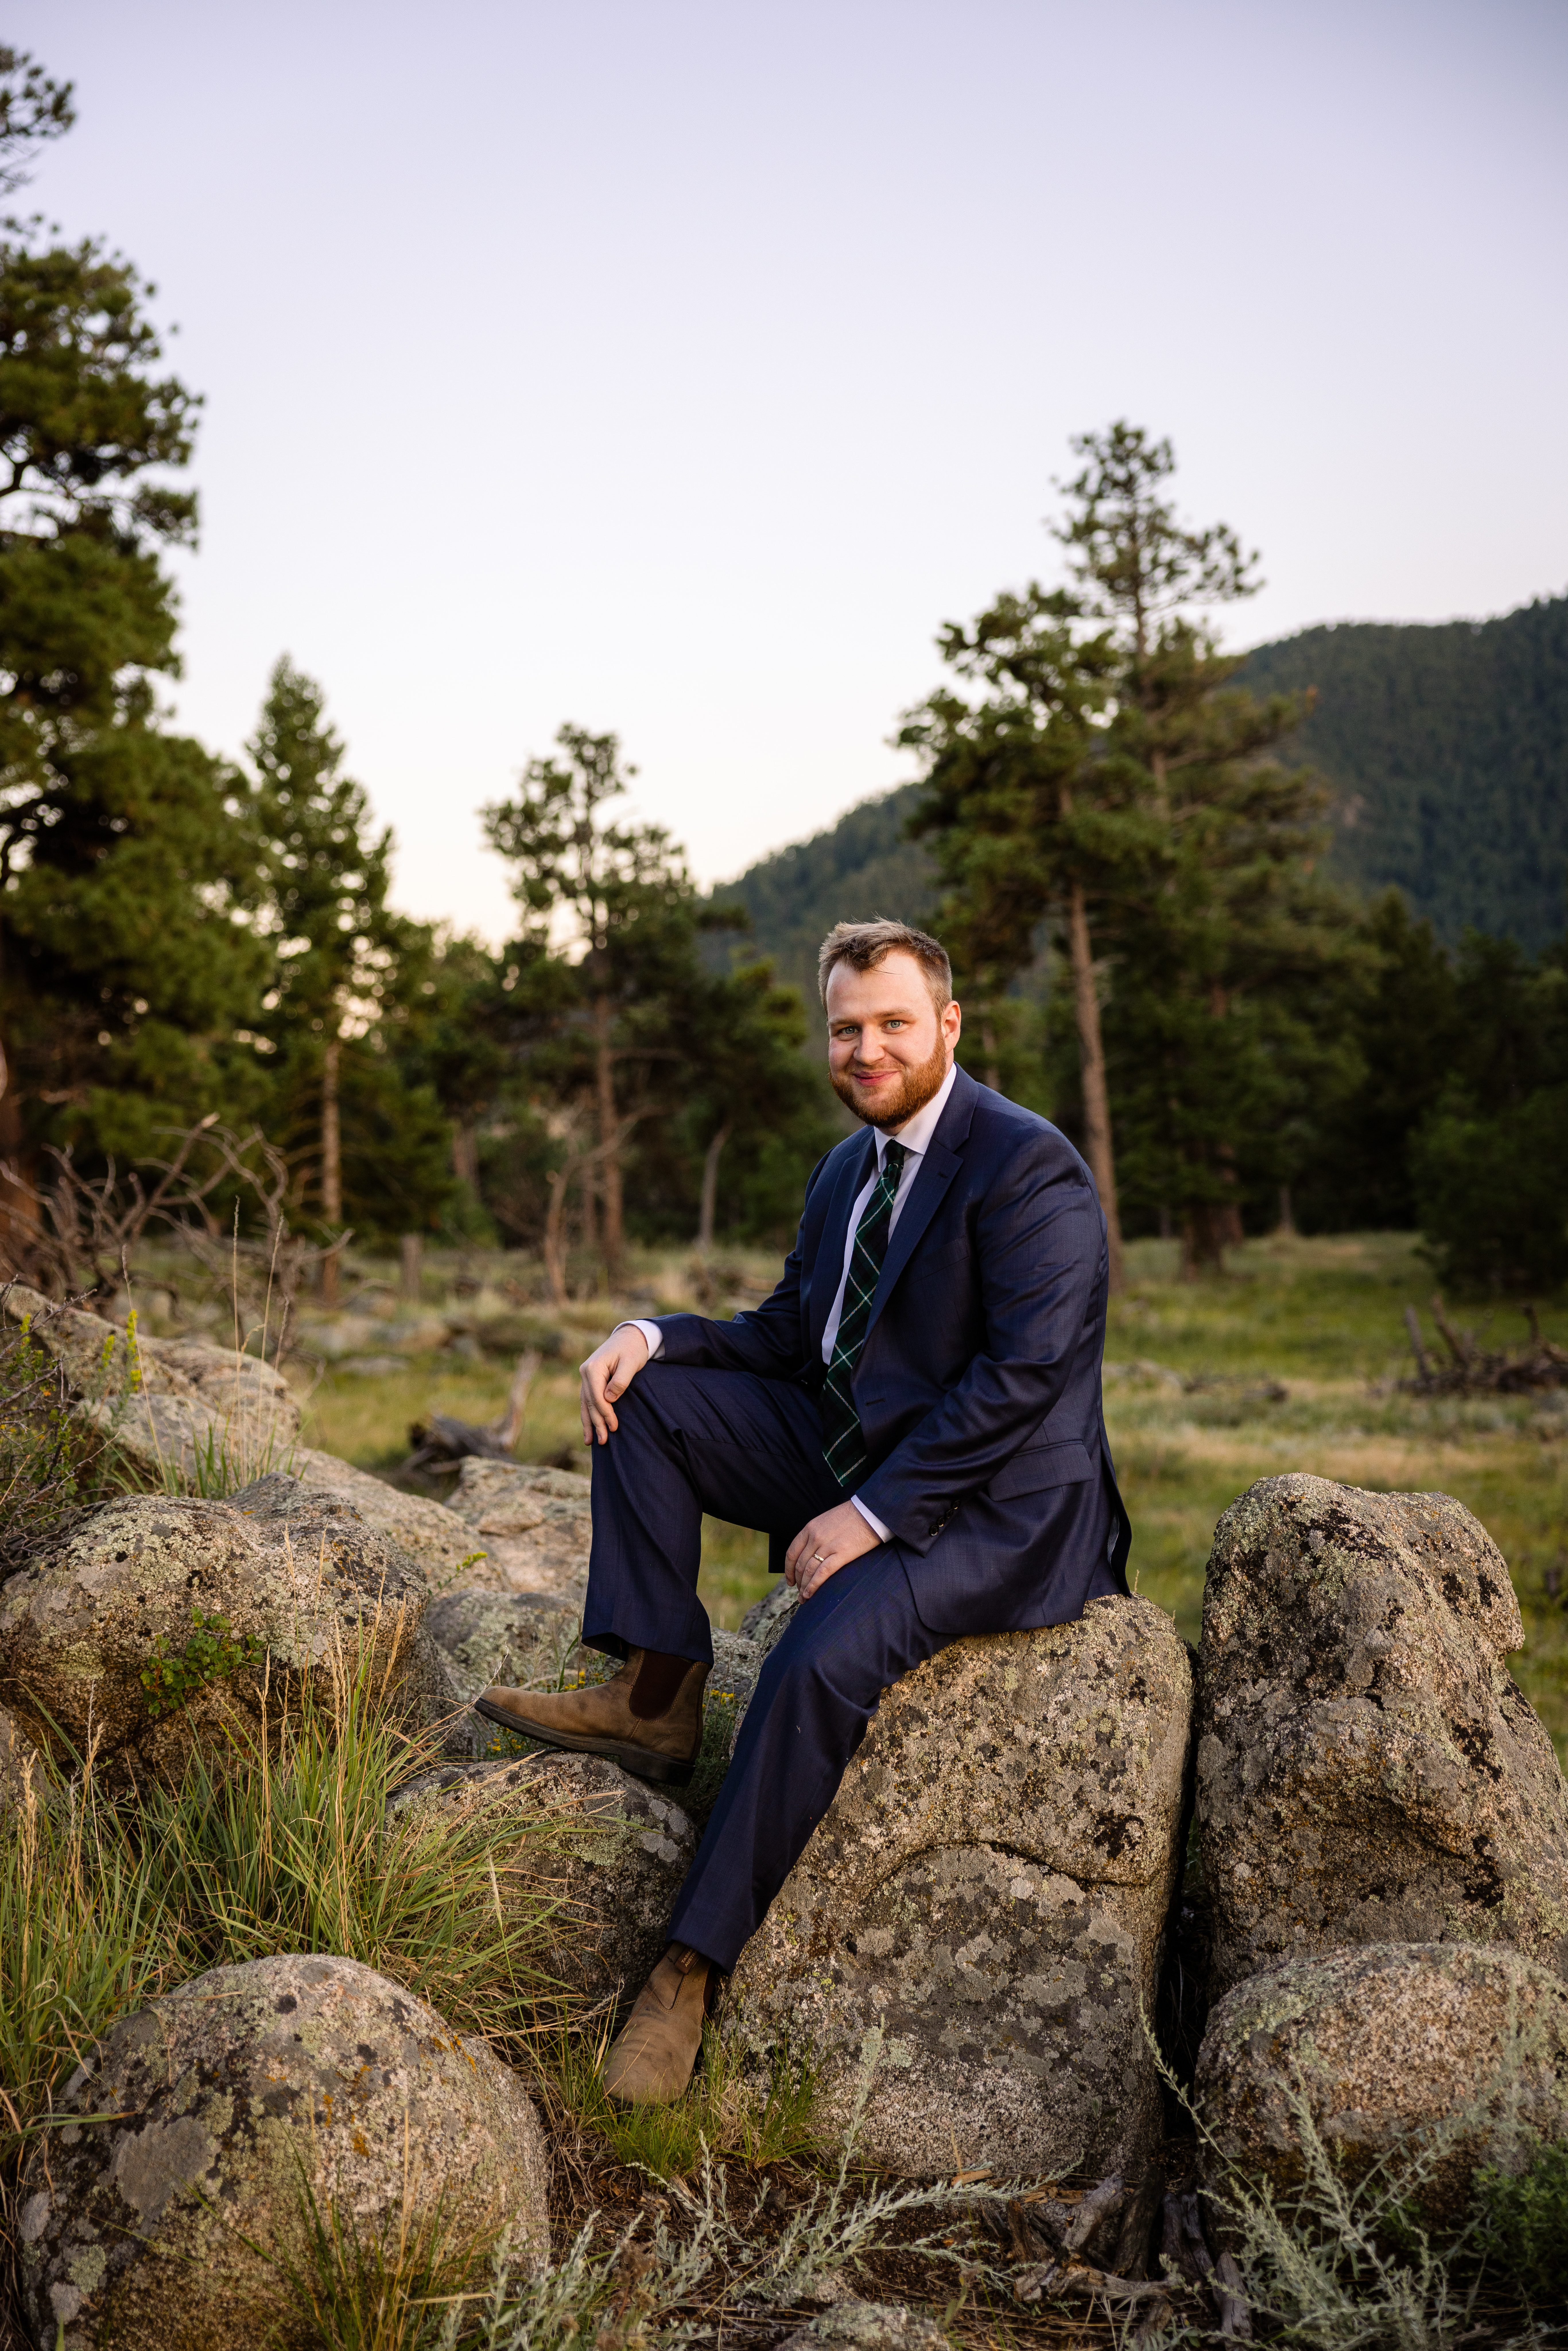 A shot of the groom after their Sunrise Amphitheater wedding.